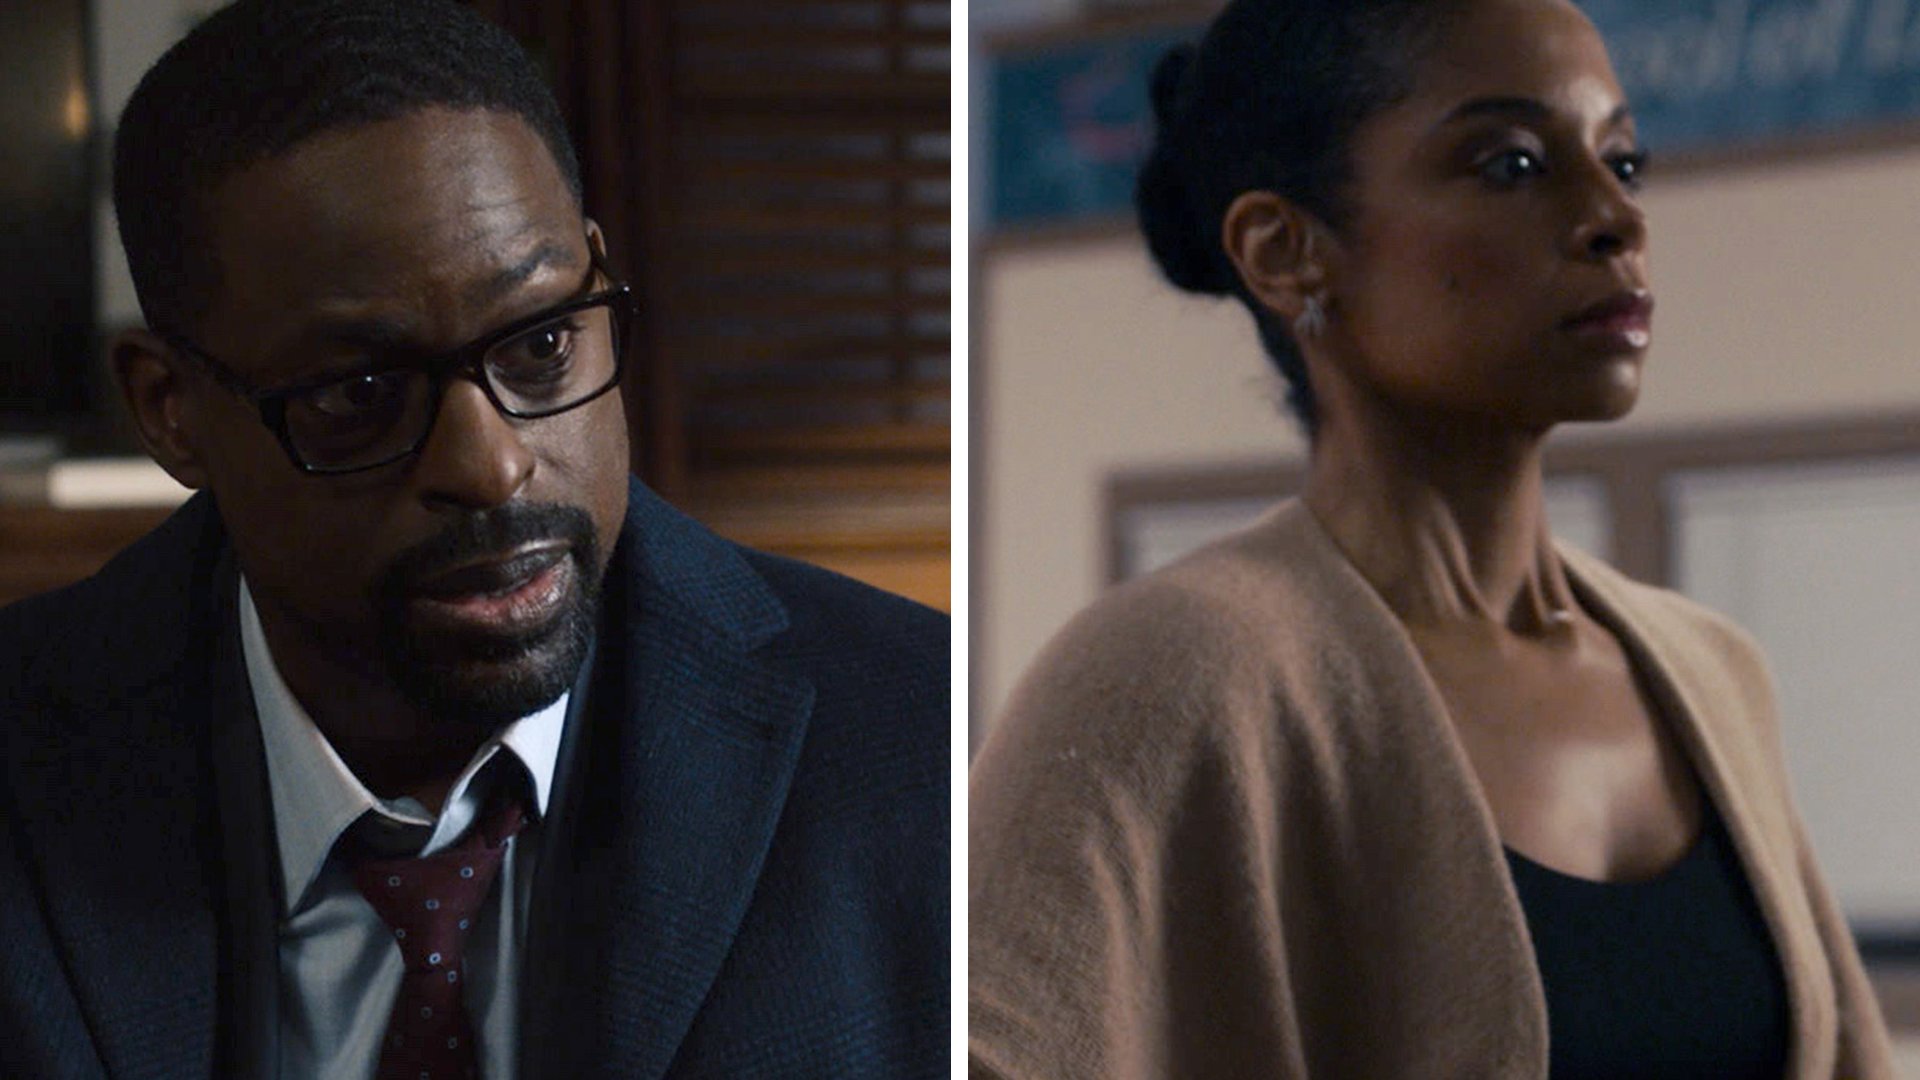 Sterling K. Brown as Randall Pearson looks at Deja (Lyric Ross) and Susan Kelechi Watson as Beth Pearson dancing at the ballet studio in ‘This Is Us’ Season 5 Episode 14, ‘The Music and the Mirror’